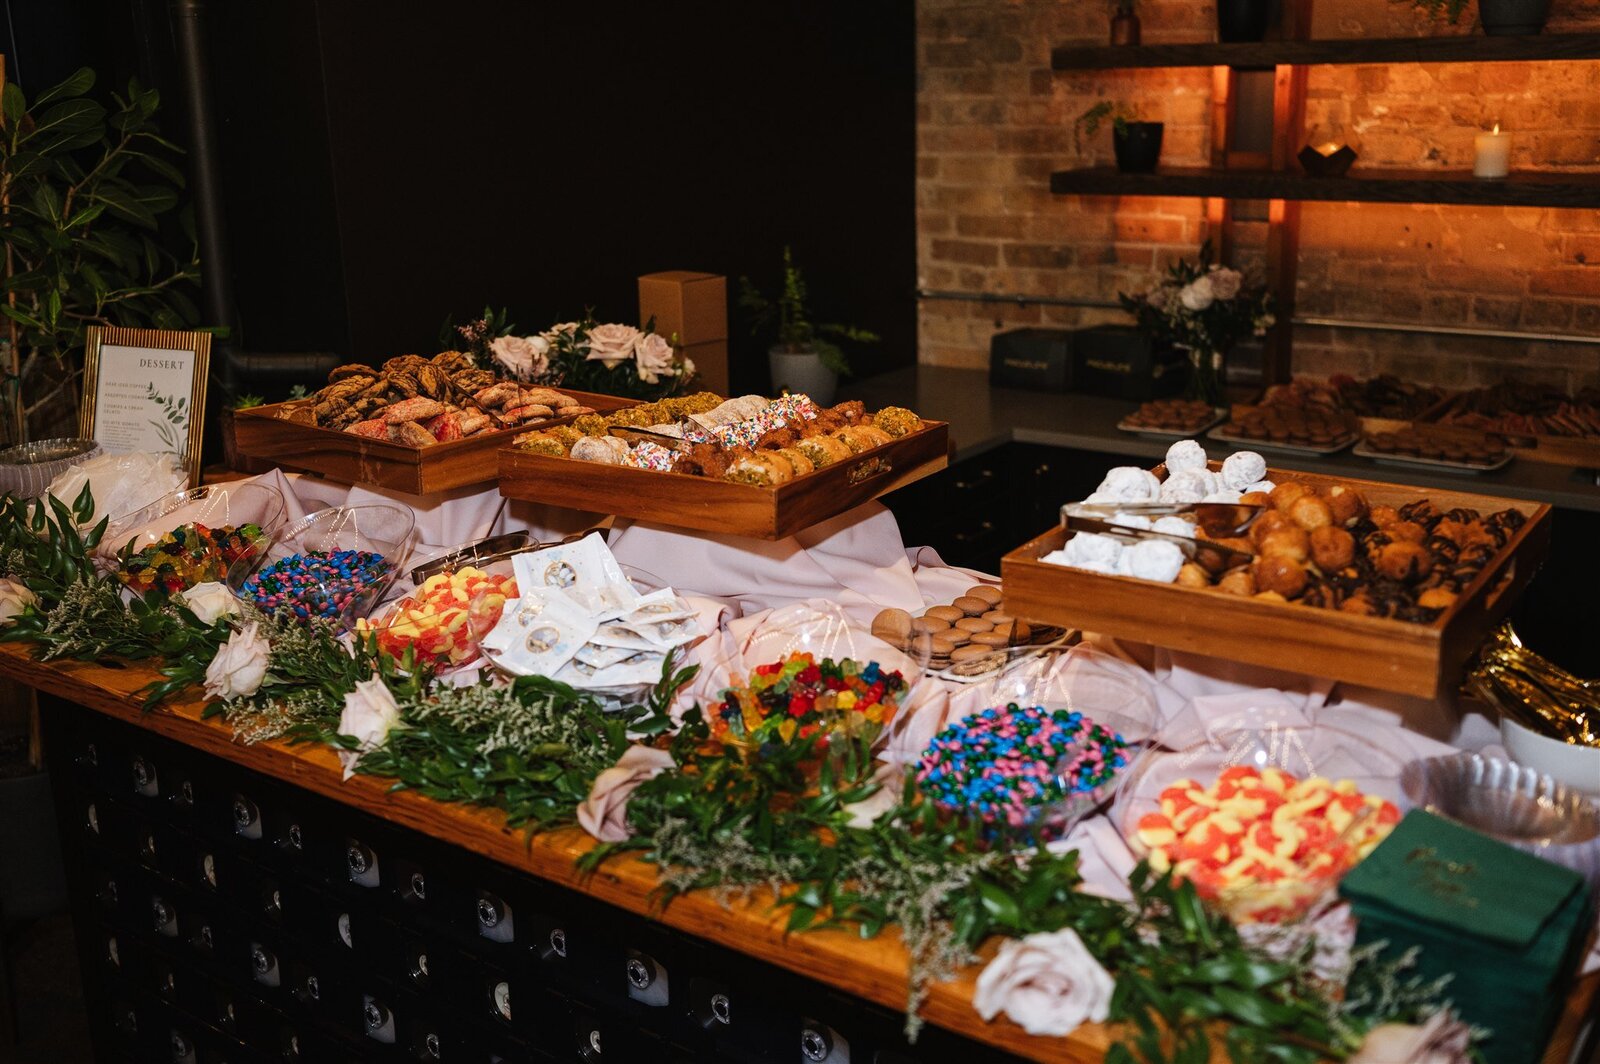 Snack Bar at Private Event